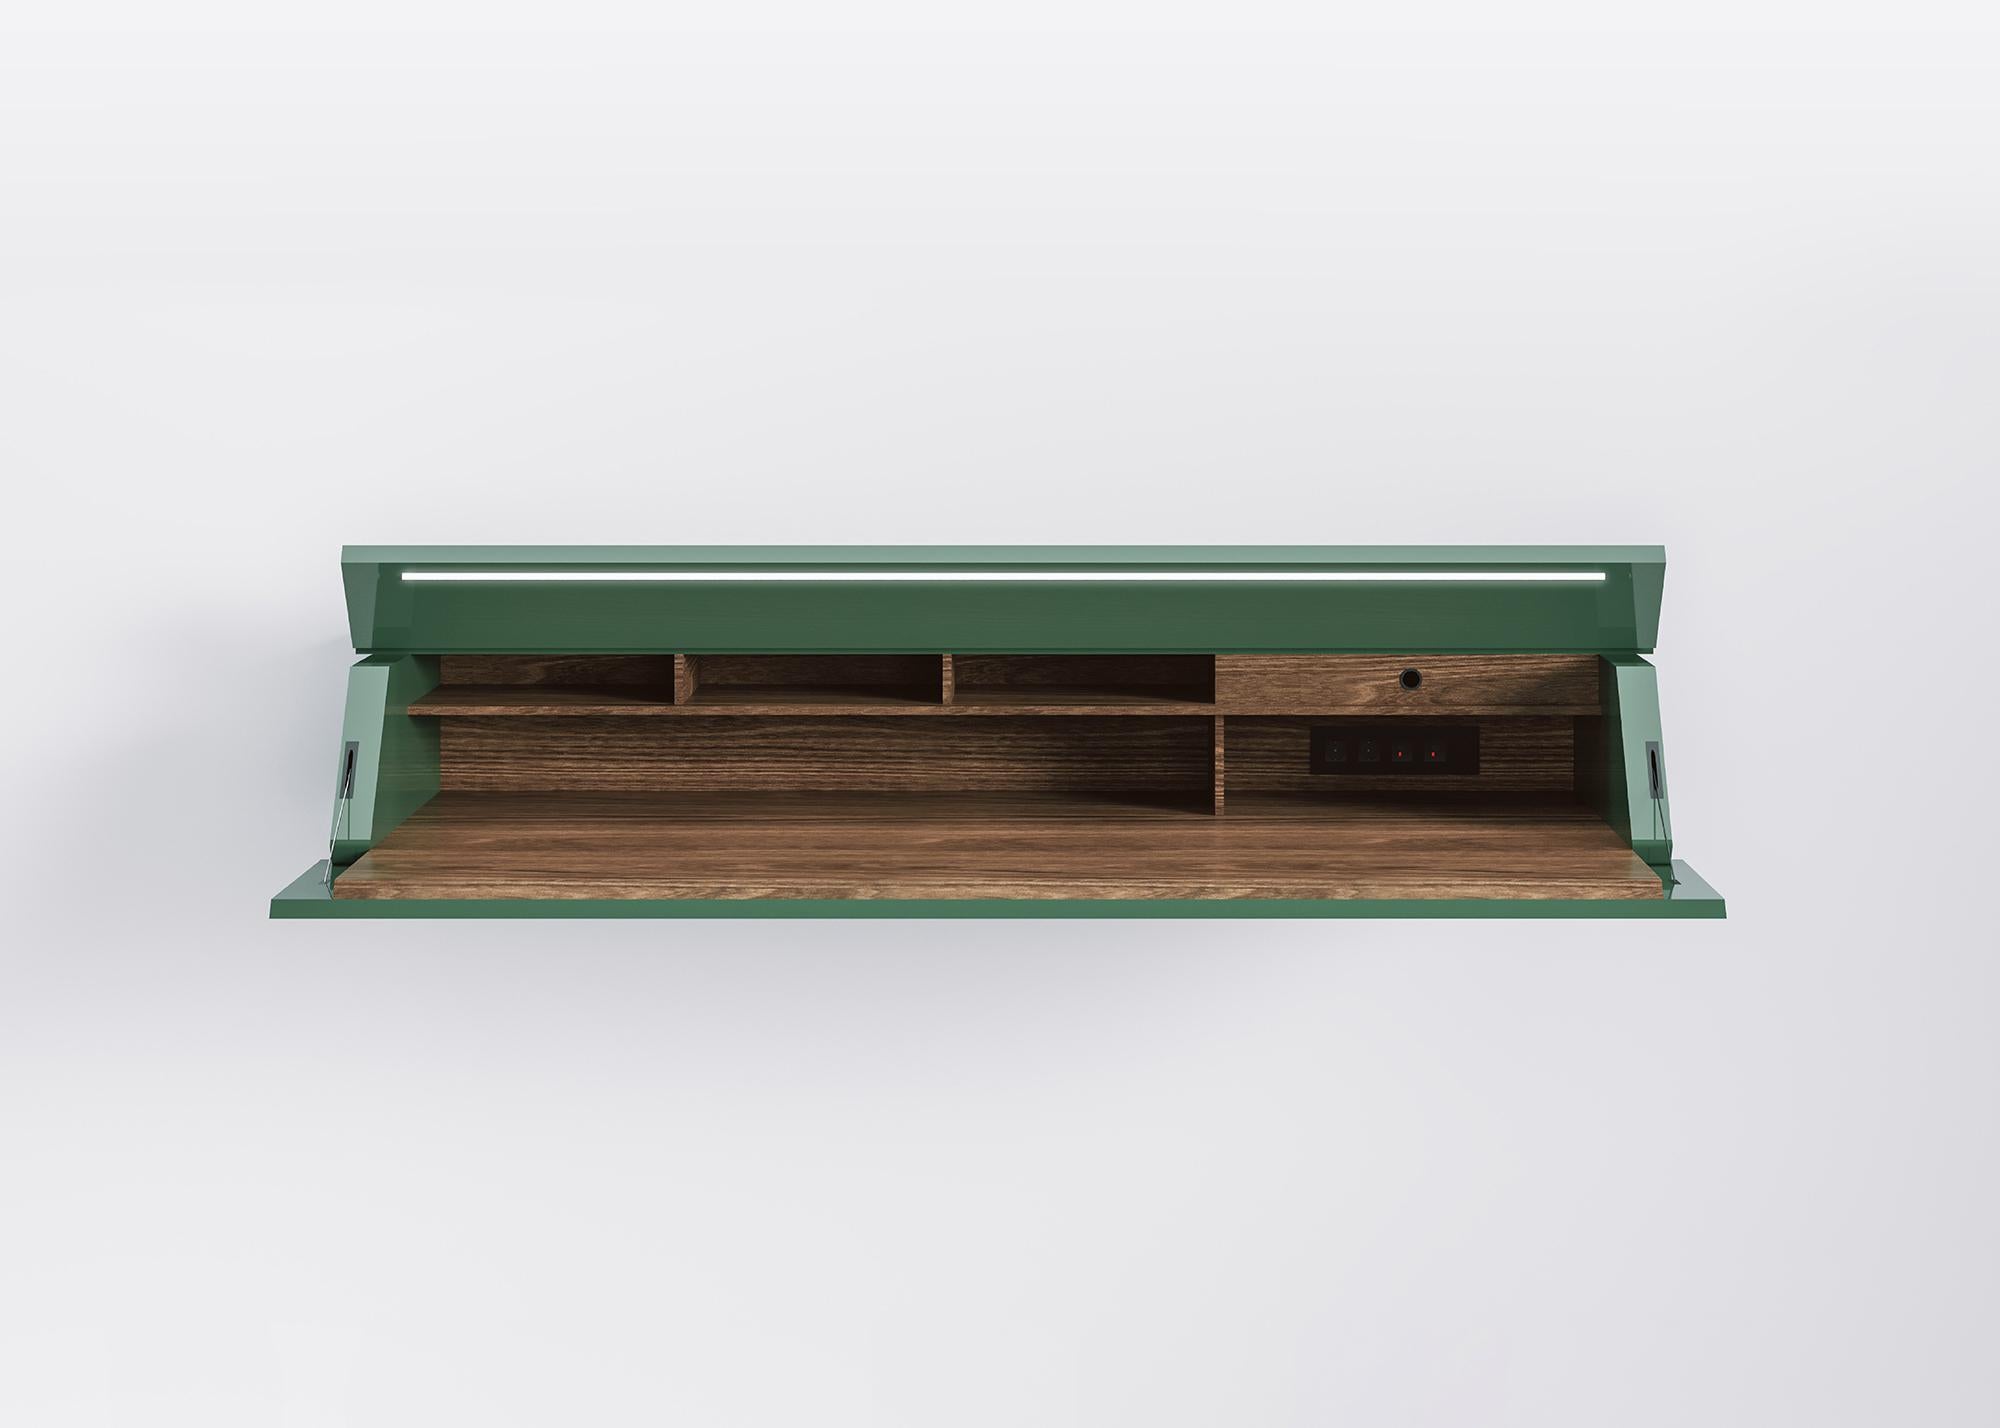 Acerbis Ghostwriter Wall-Mounted Desk/Bookcase in Glossy Lacquered Dark Green In New Condition For Sale In Brooklyn, NY